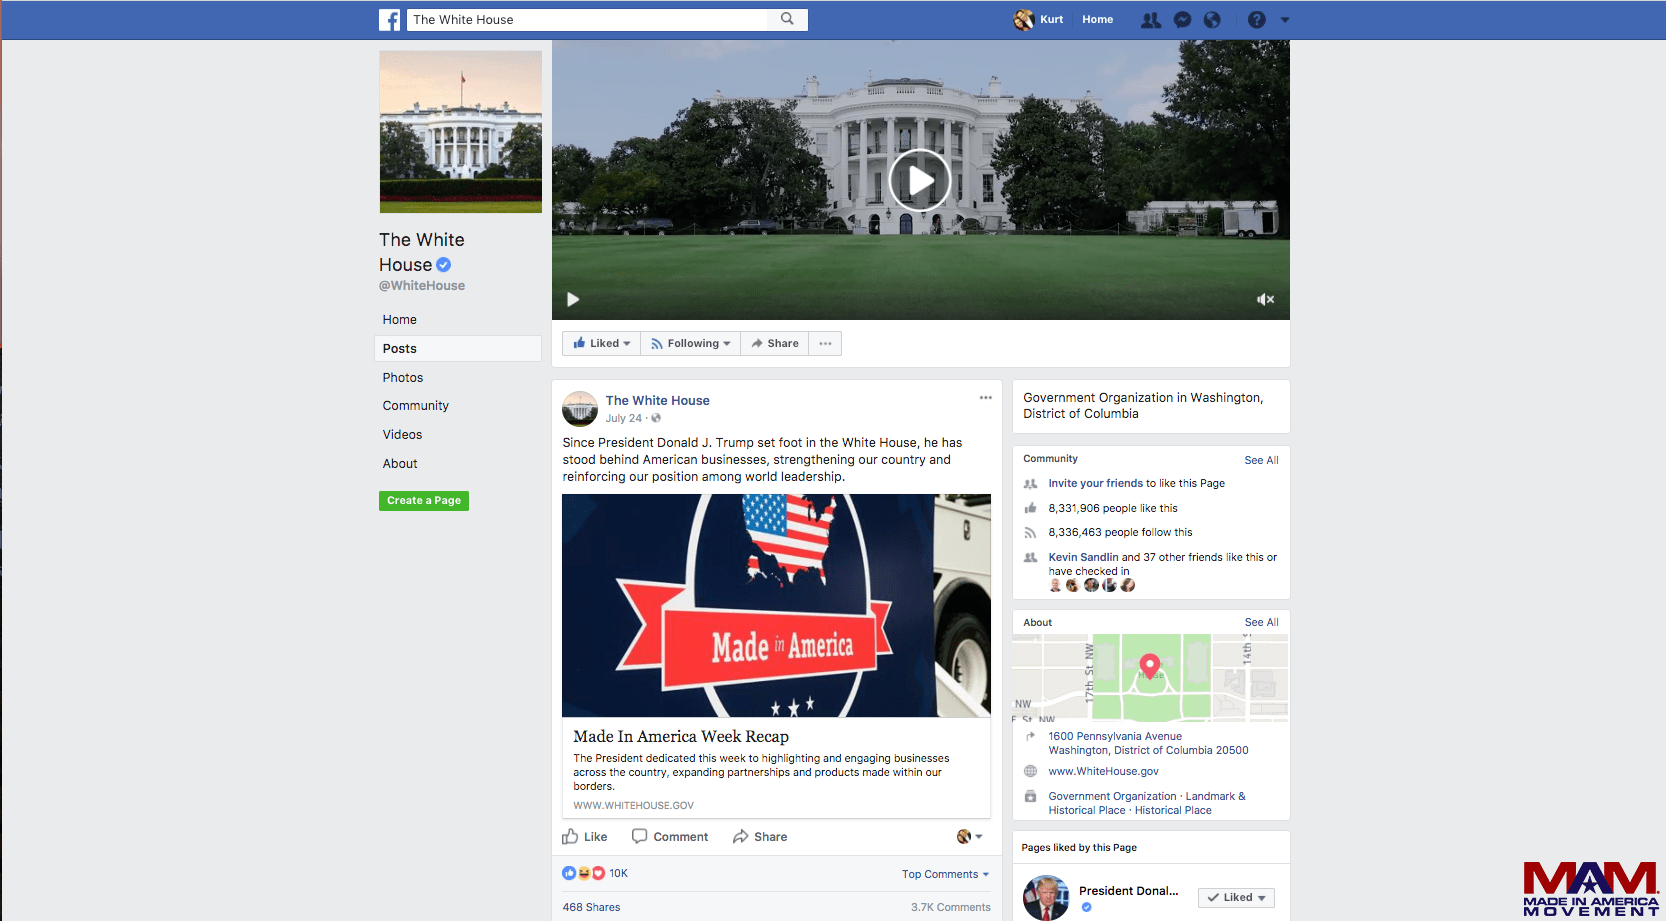 White House Facebook post on Made in America Week 8a